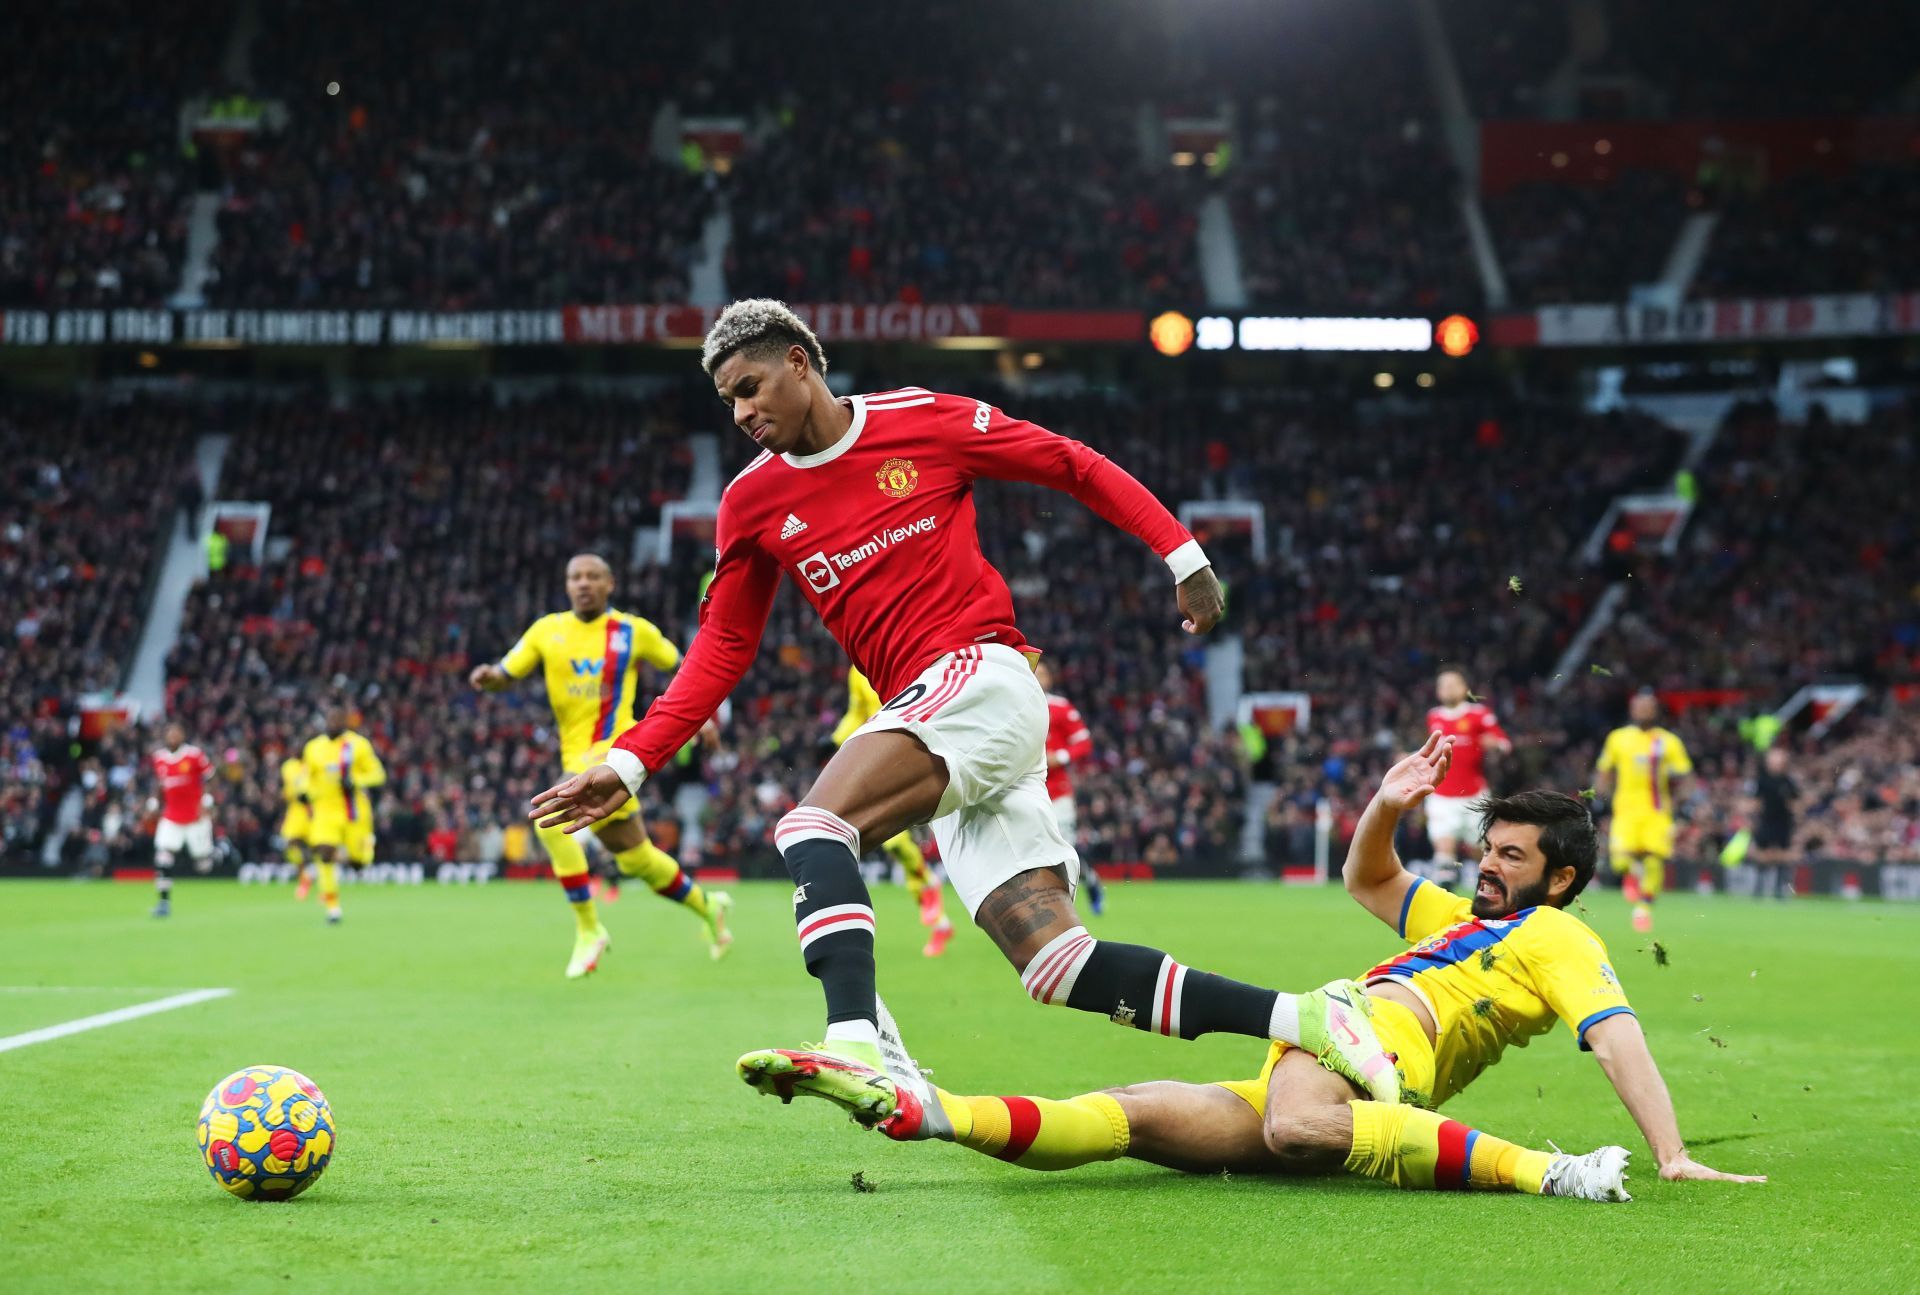 Manchester United held a highline during the first half against Crystal Palace